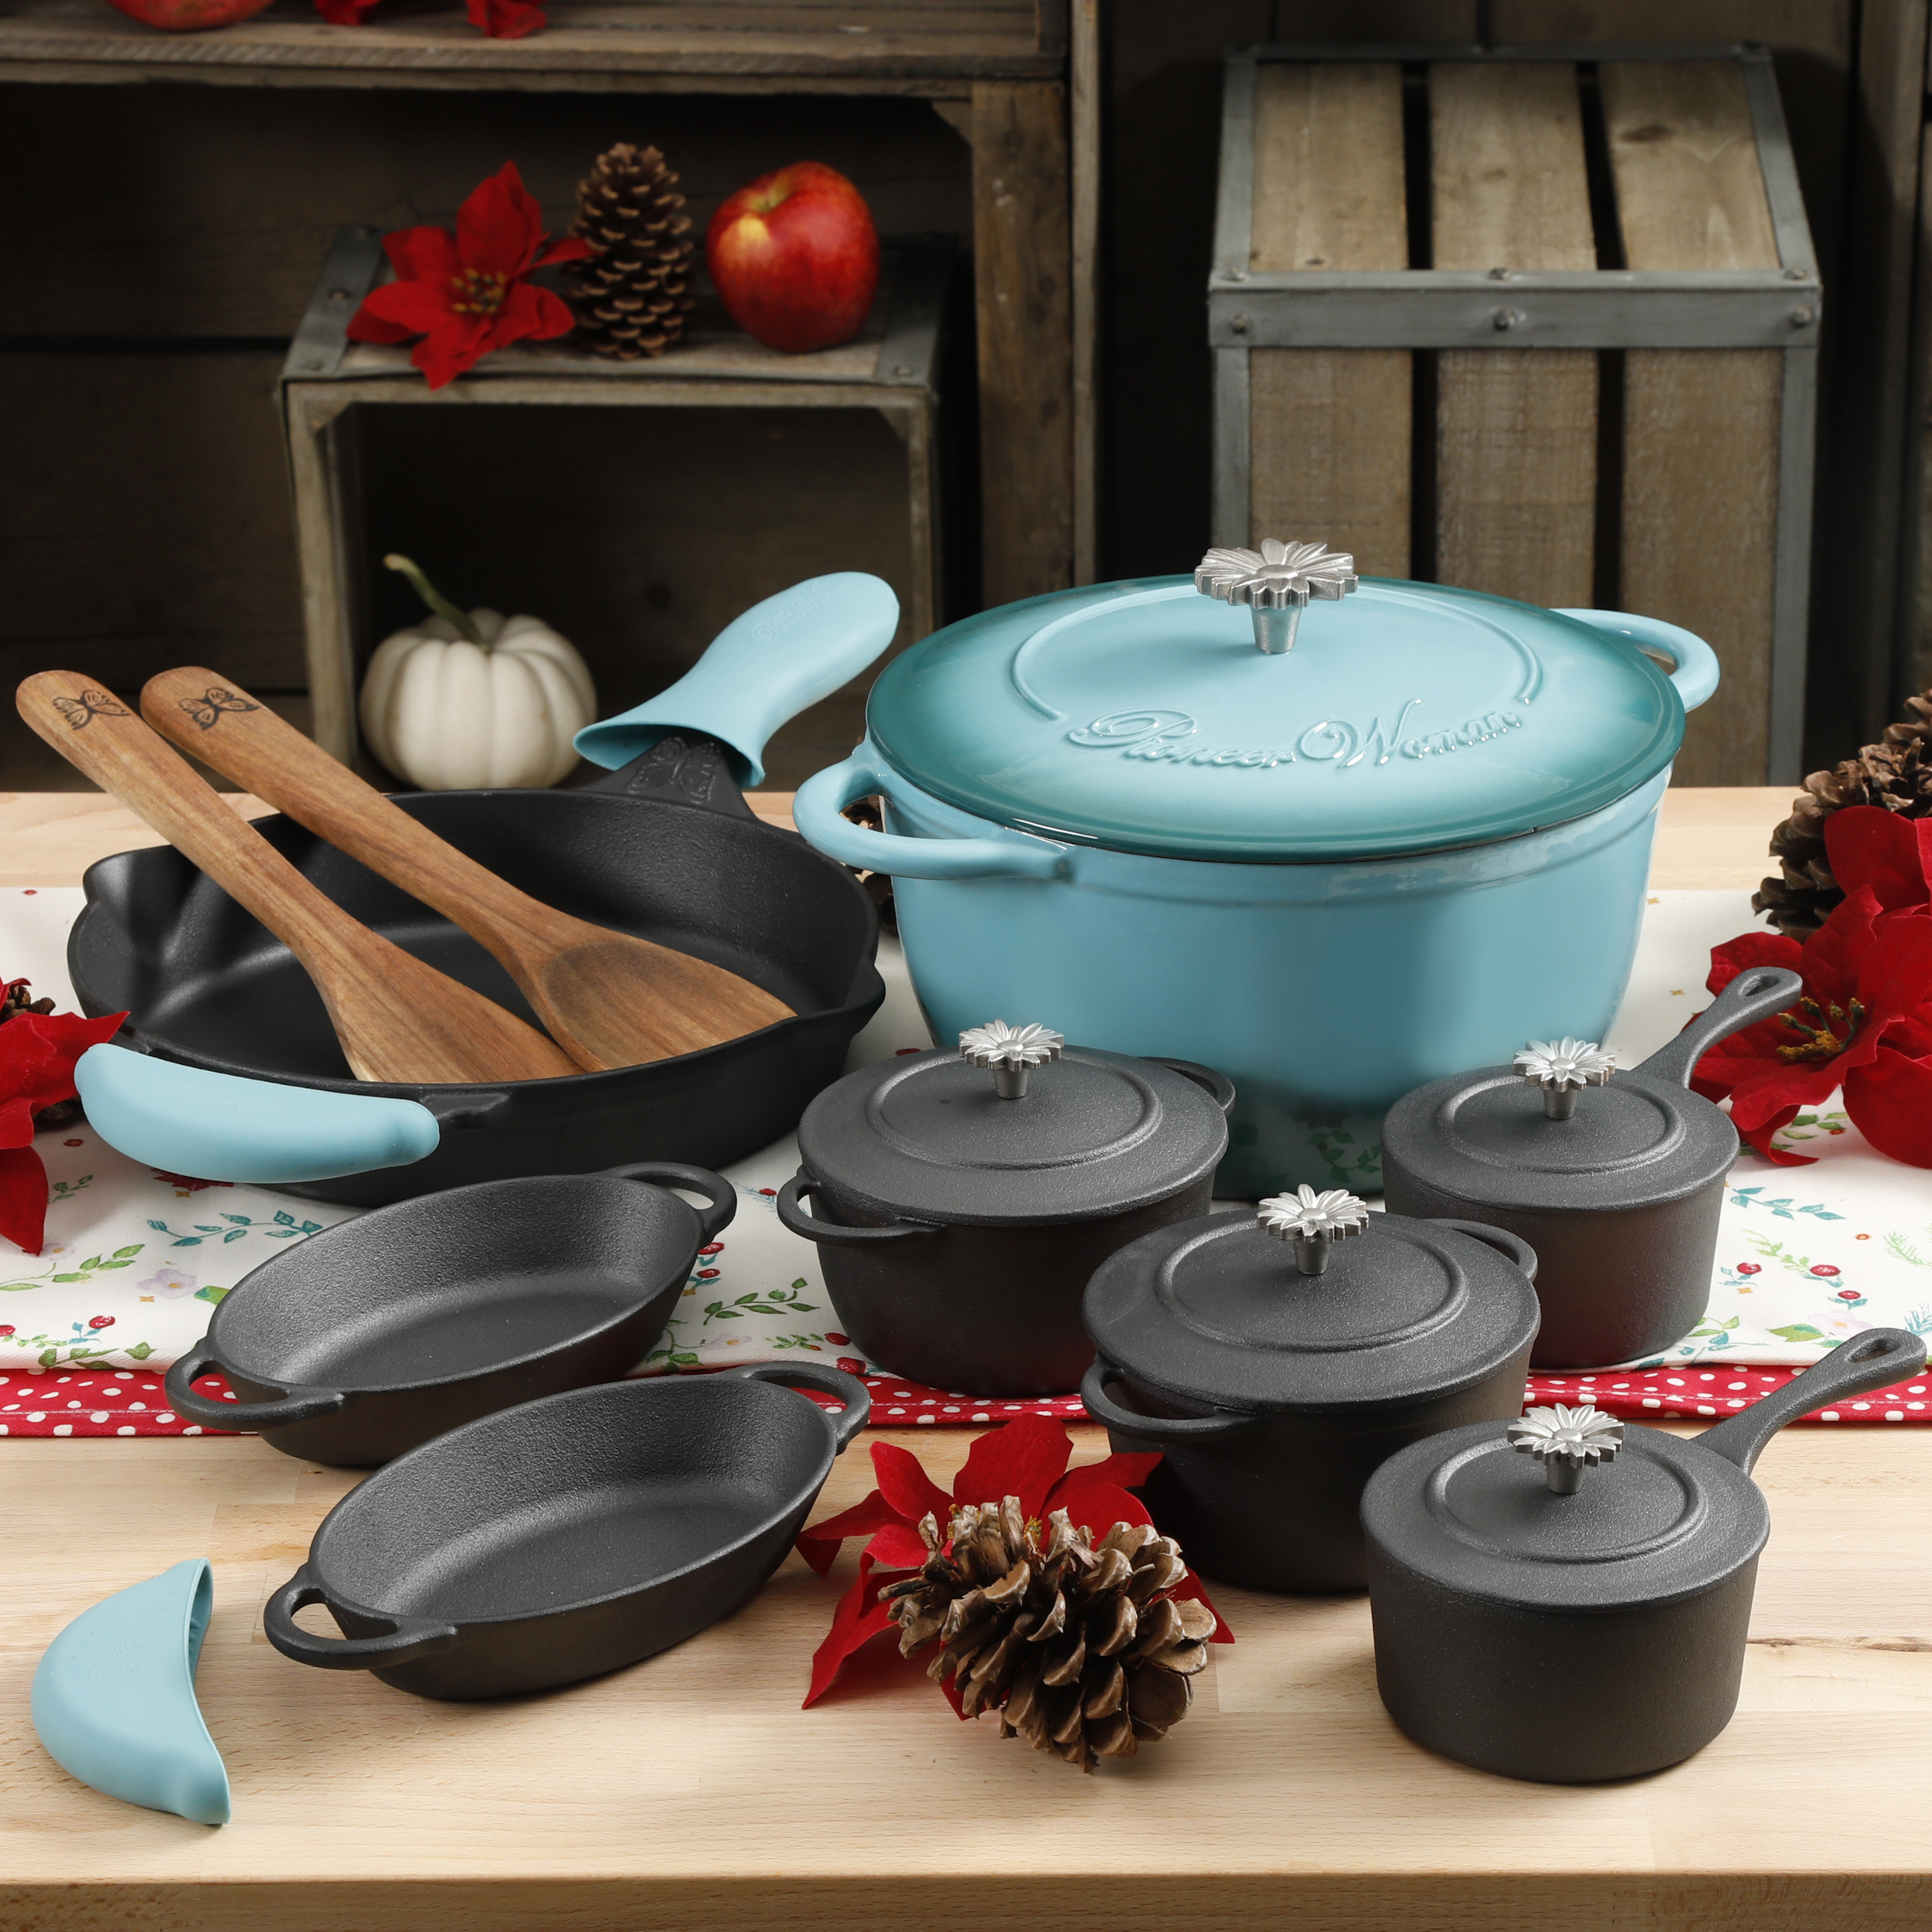 The Pioneer Woman timeless 18-piece turquoise cast iron essential set for $80